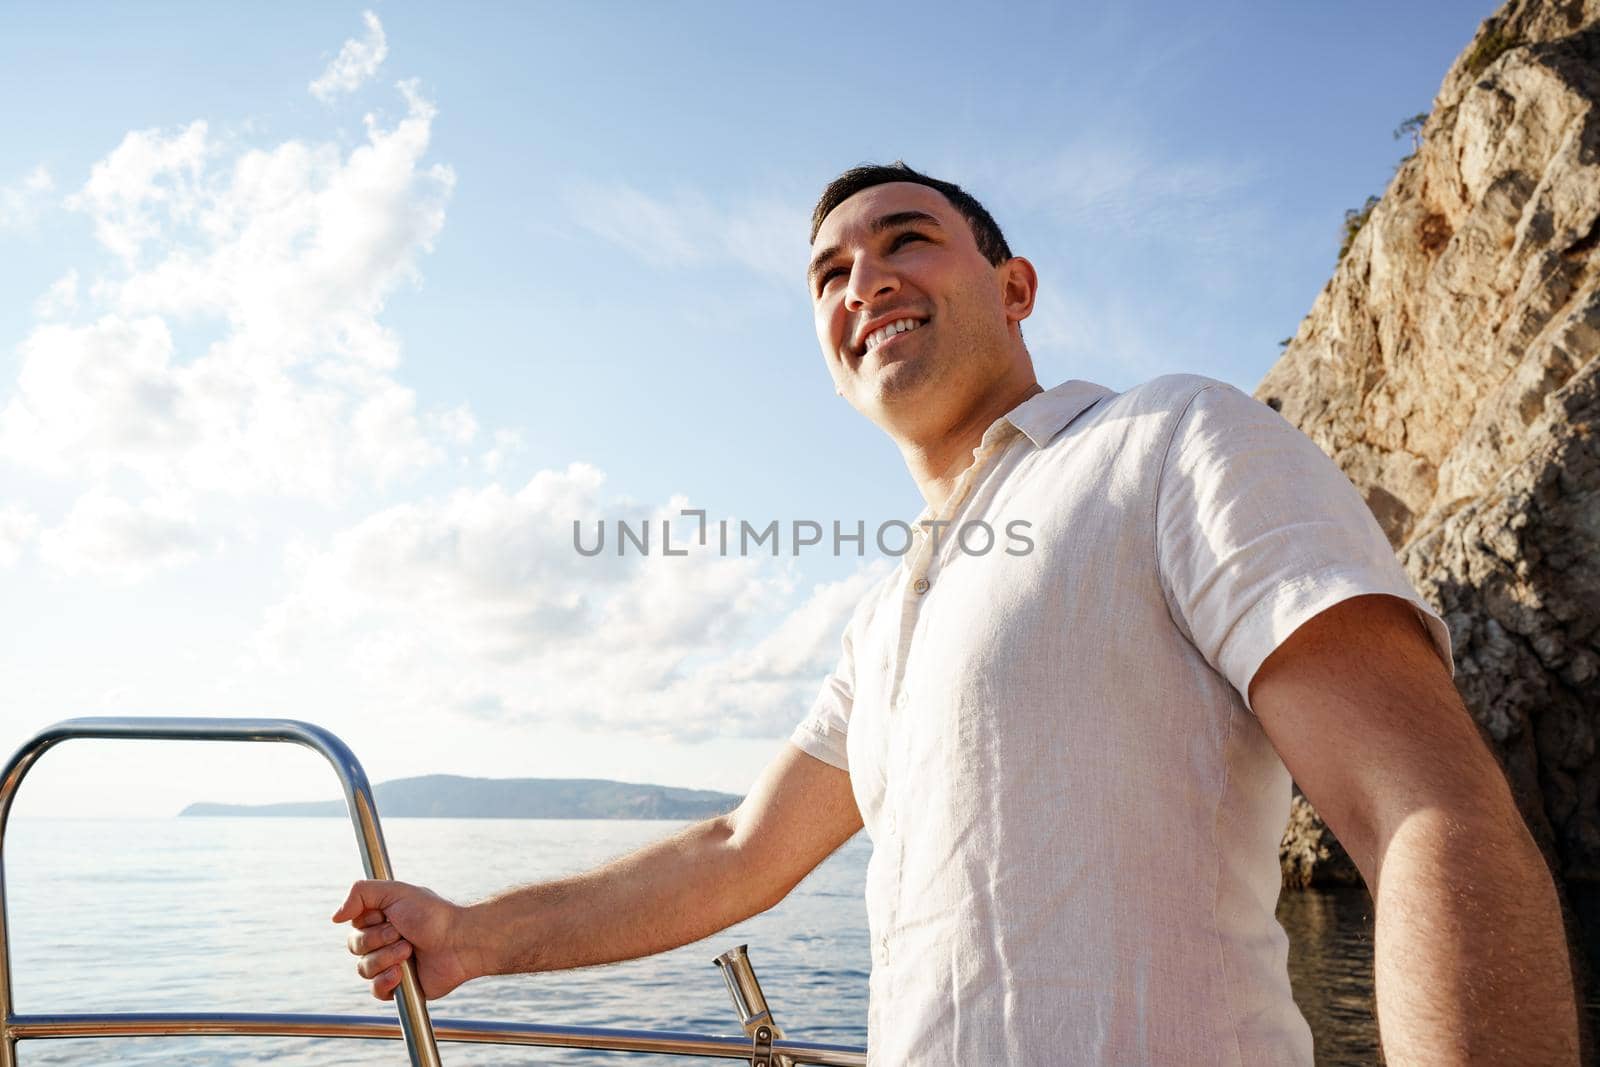 Young man in white shirt standing on the nose yacht in the open sea